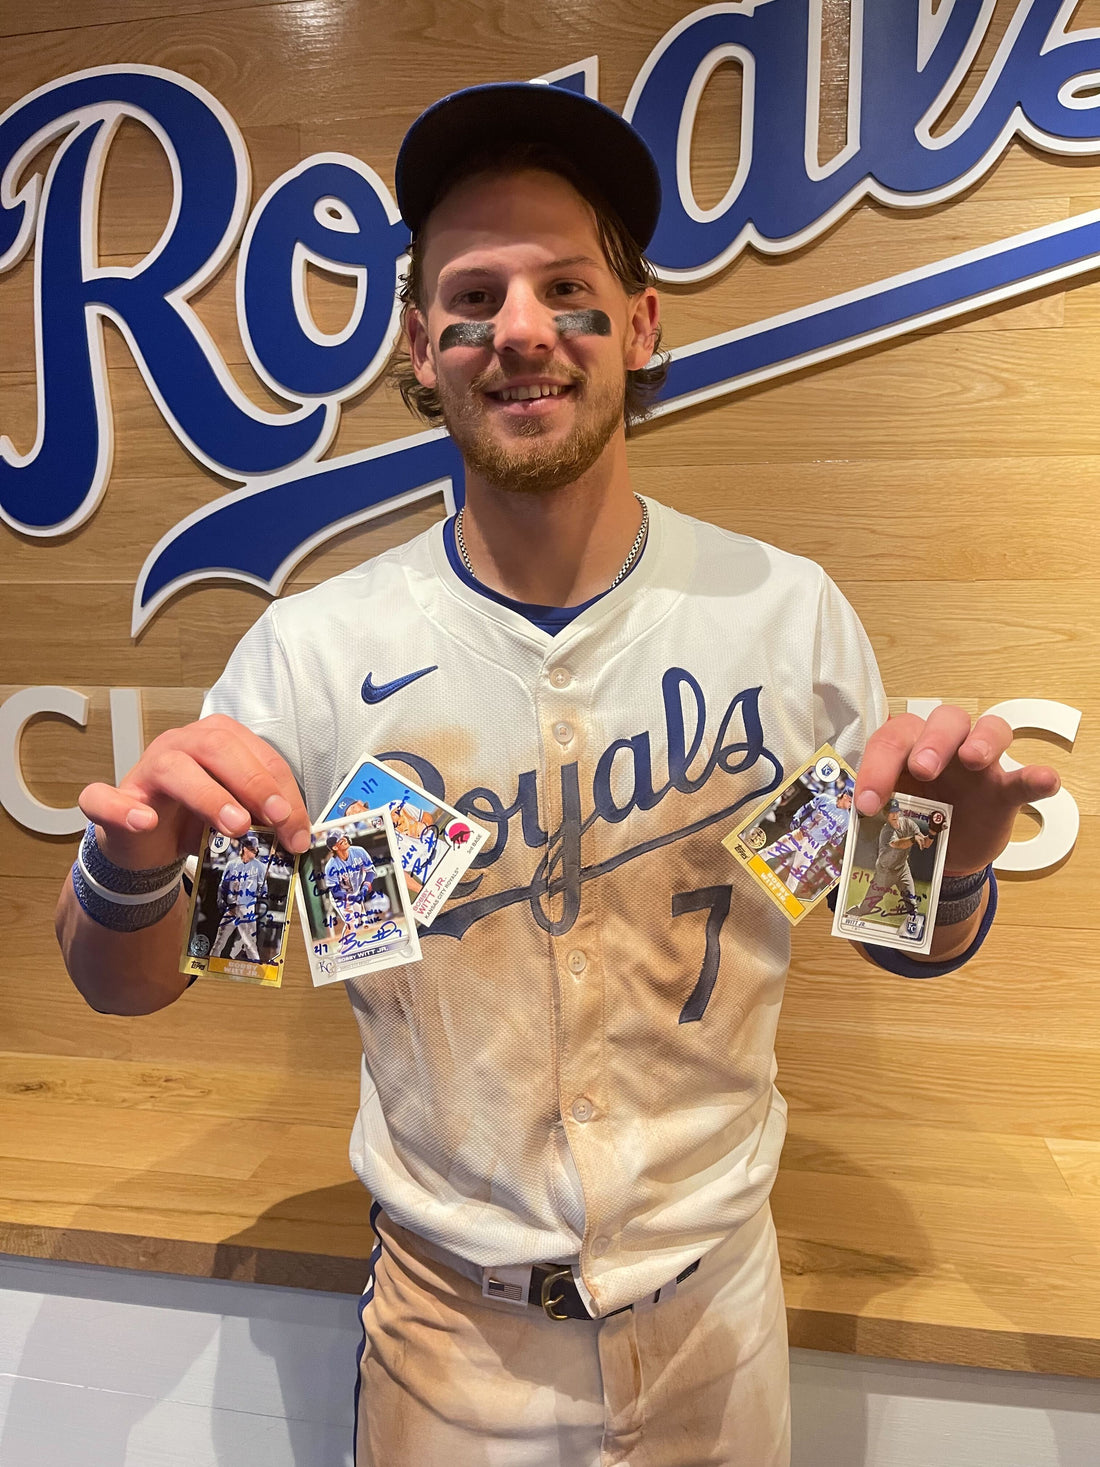 From Pocket to Plate: How Bobby Witt Jr. and Corbin Carroll Turned Baseball Cards into Game-Used Memorabilia